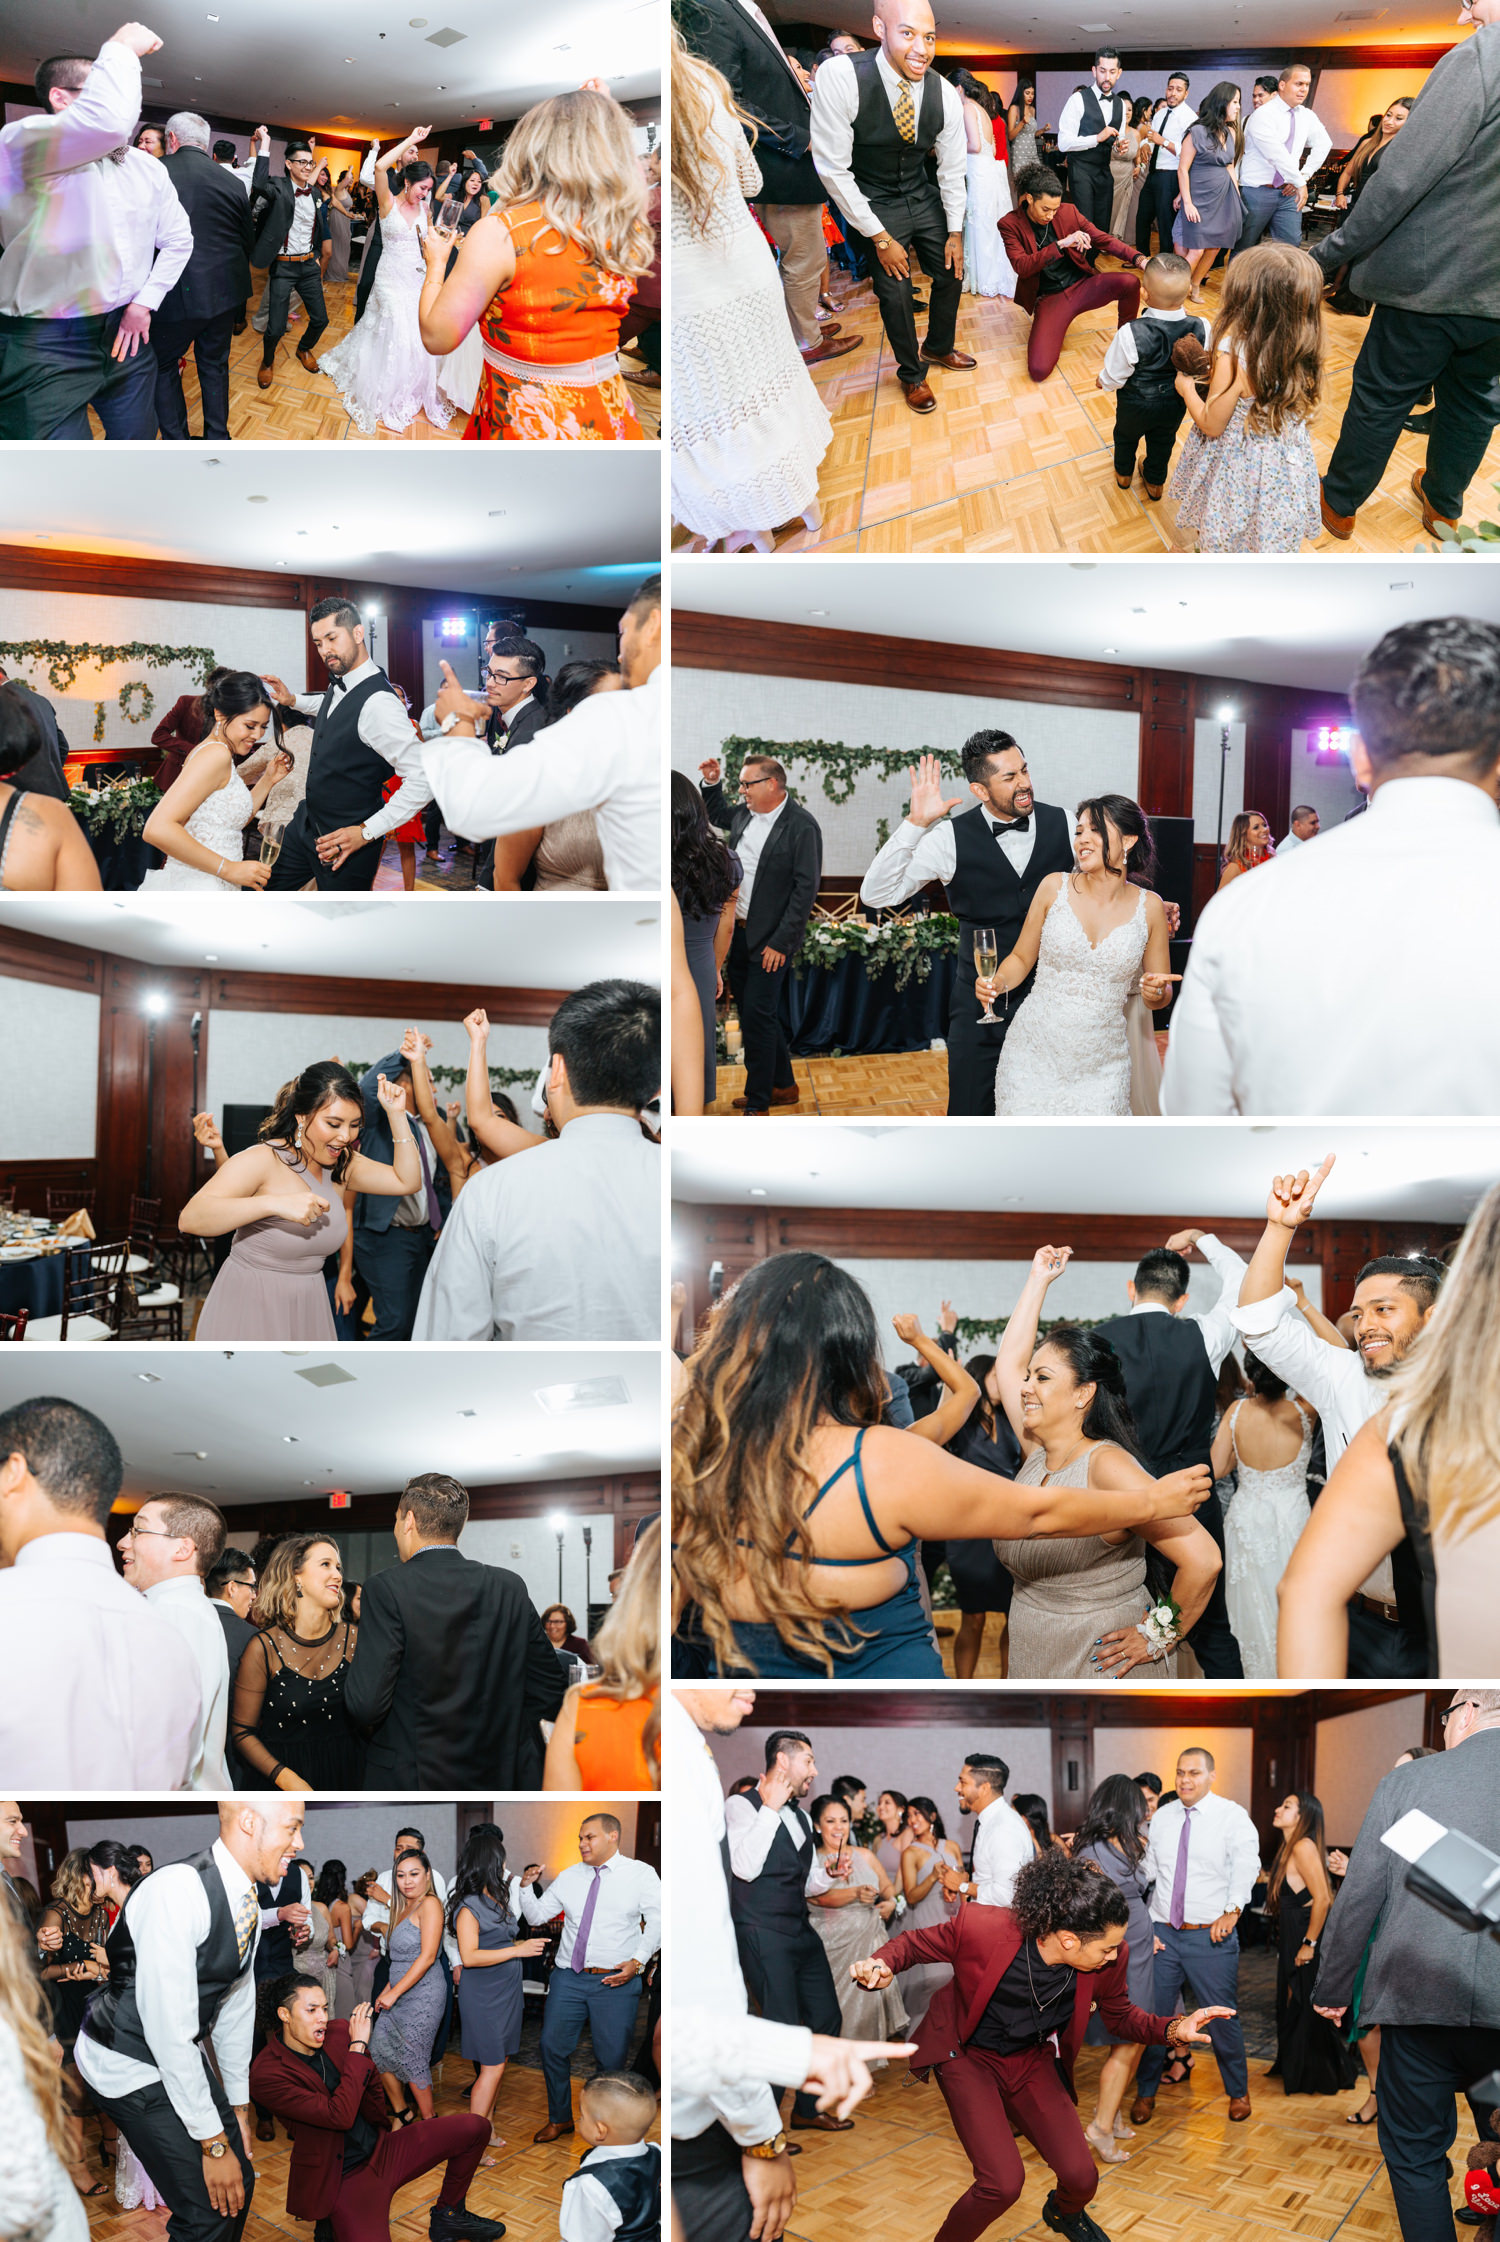 Dancing at the wedding reception - https://brittneyhannonphotography.com